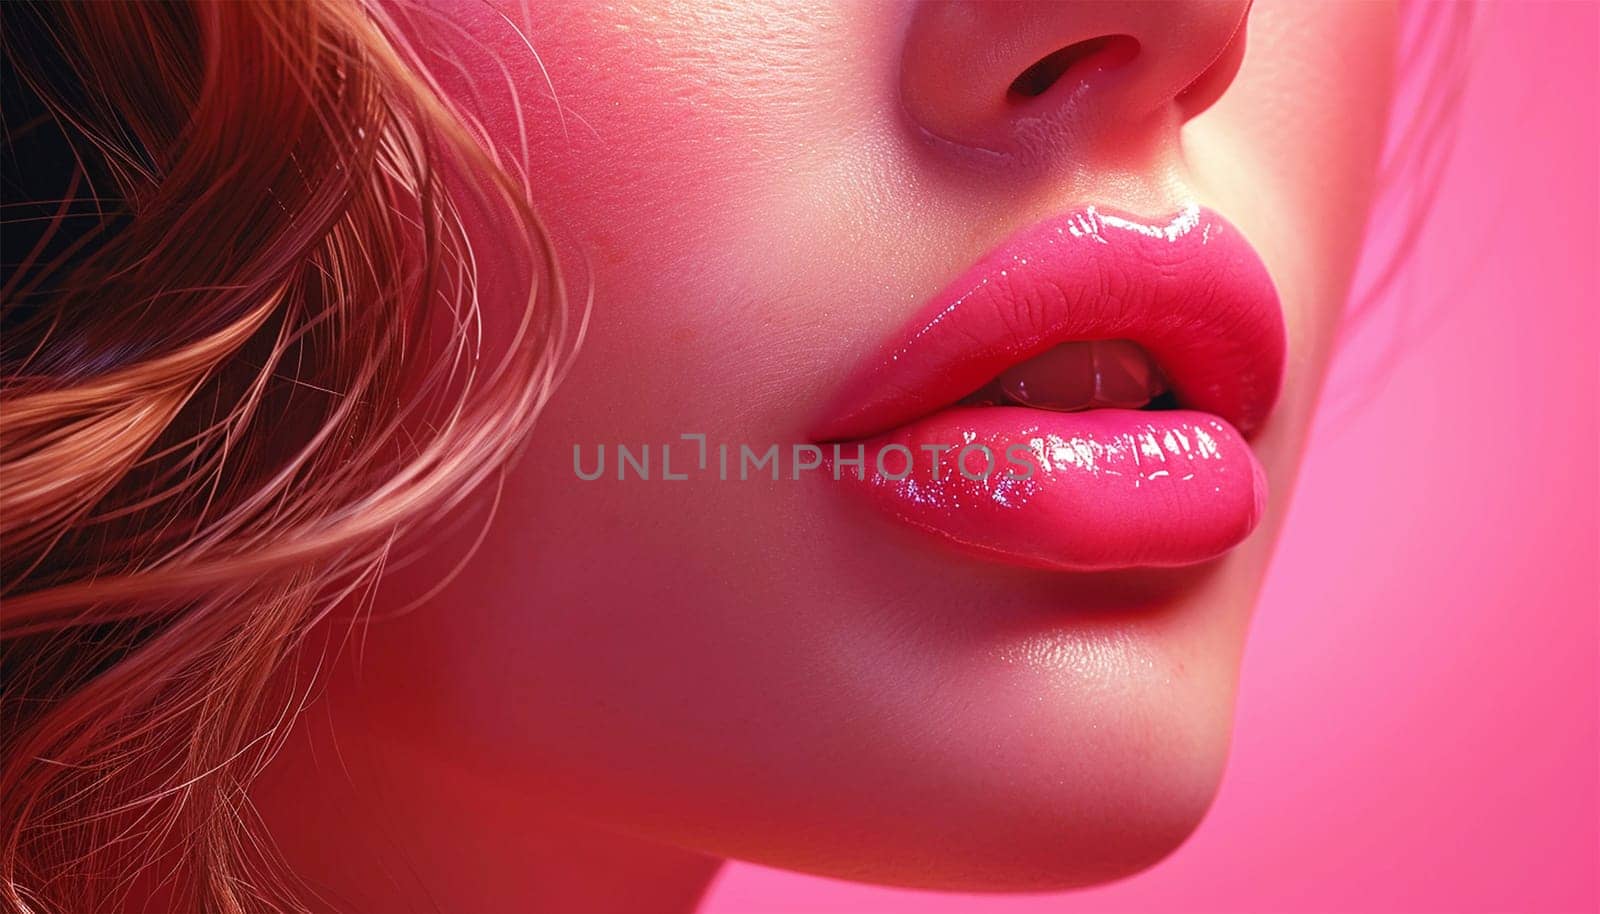 Beautiful lips Close-up. Makeup. Lip matte lipstick. Sexy lips. Part of face, young woman close up. perfect plump lips bodily lipstick. peach color of lipstick on large lips. Perfect makeup Copy space fashion beauty concept by Annebel146